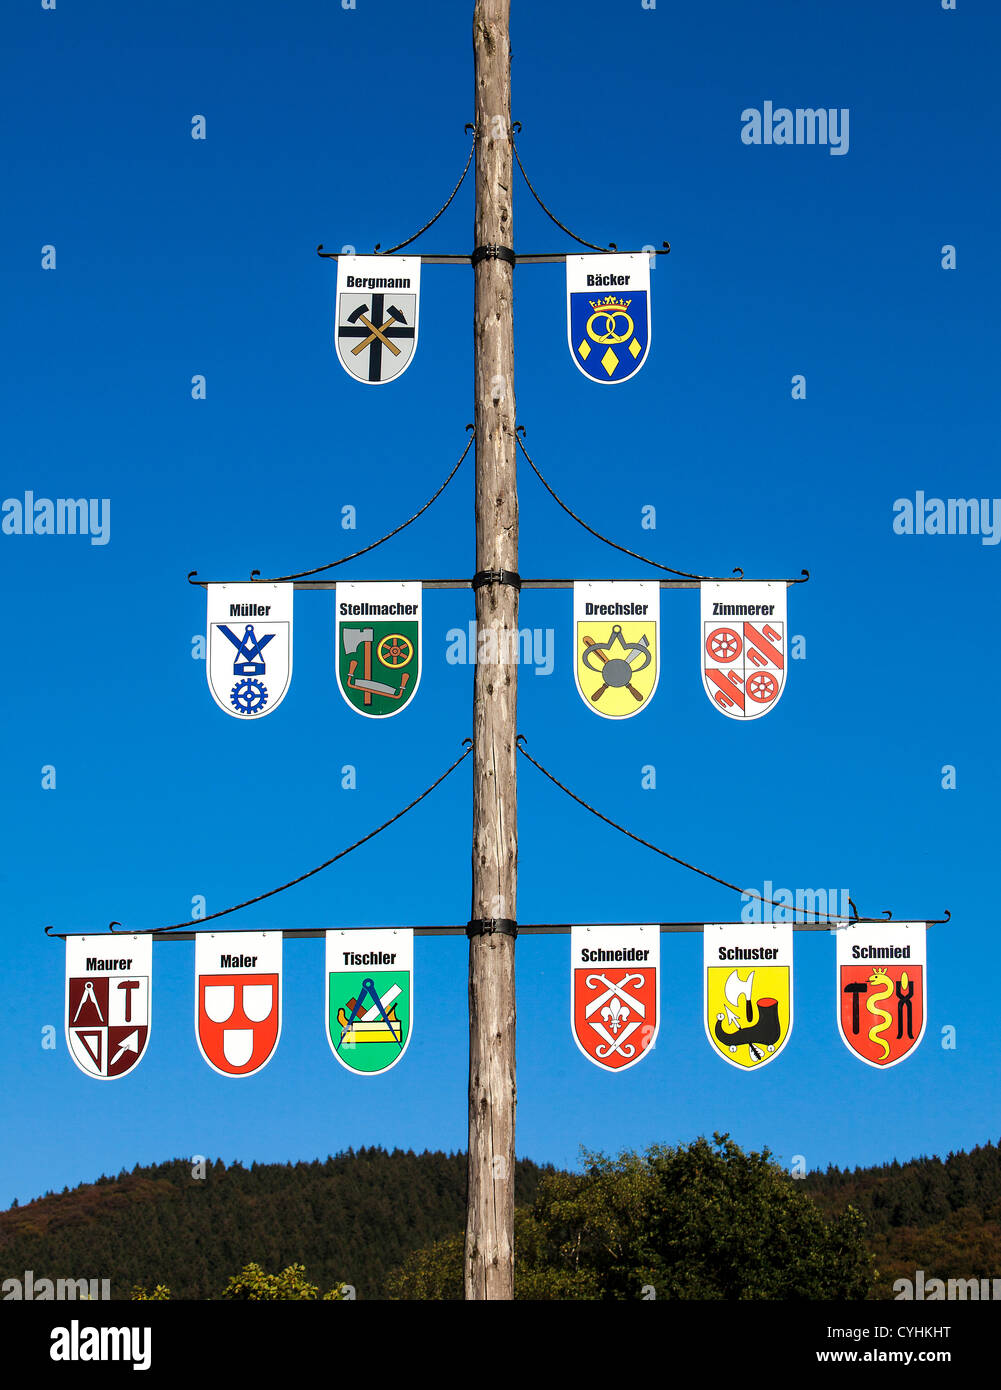 Coat tree, shows all coat of arms of any kind of craftsman in a village in the Sauerland area, north western Germany. Stock Photo